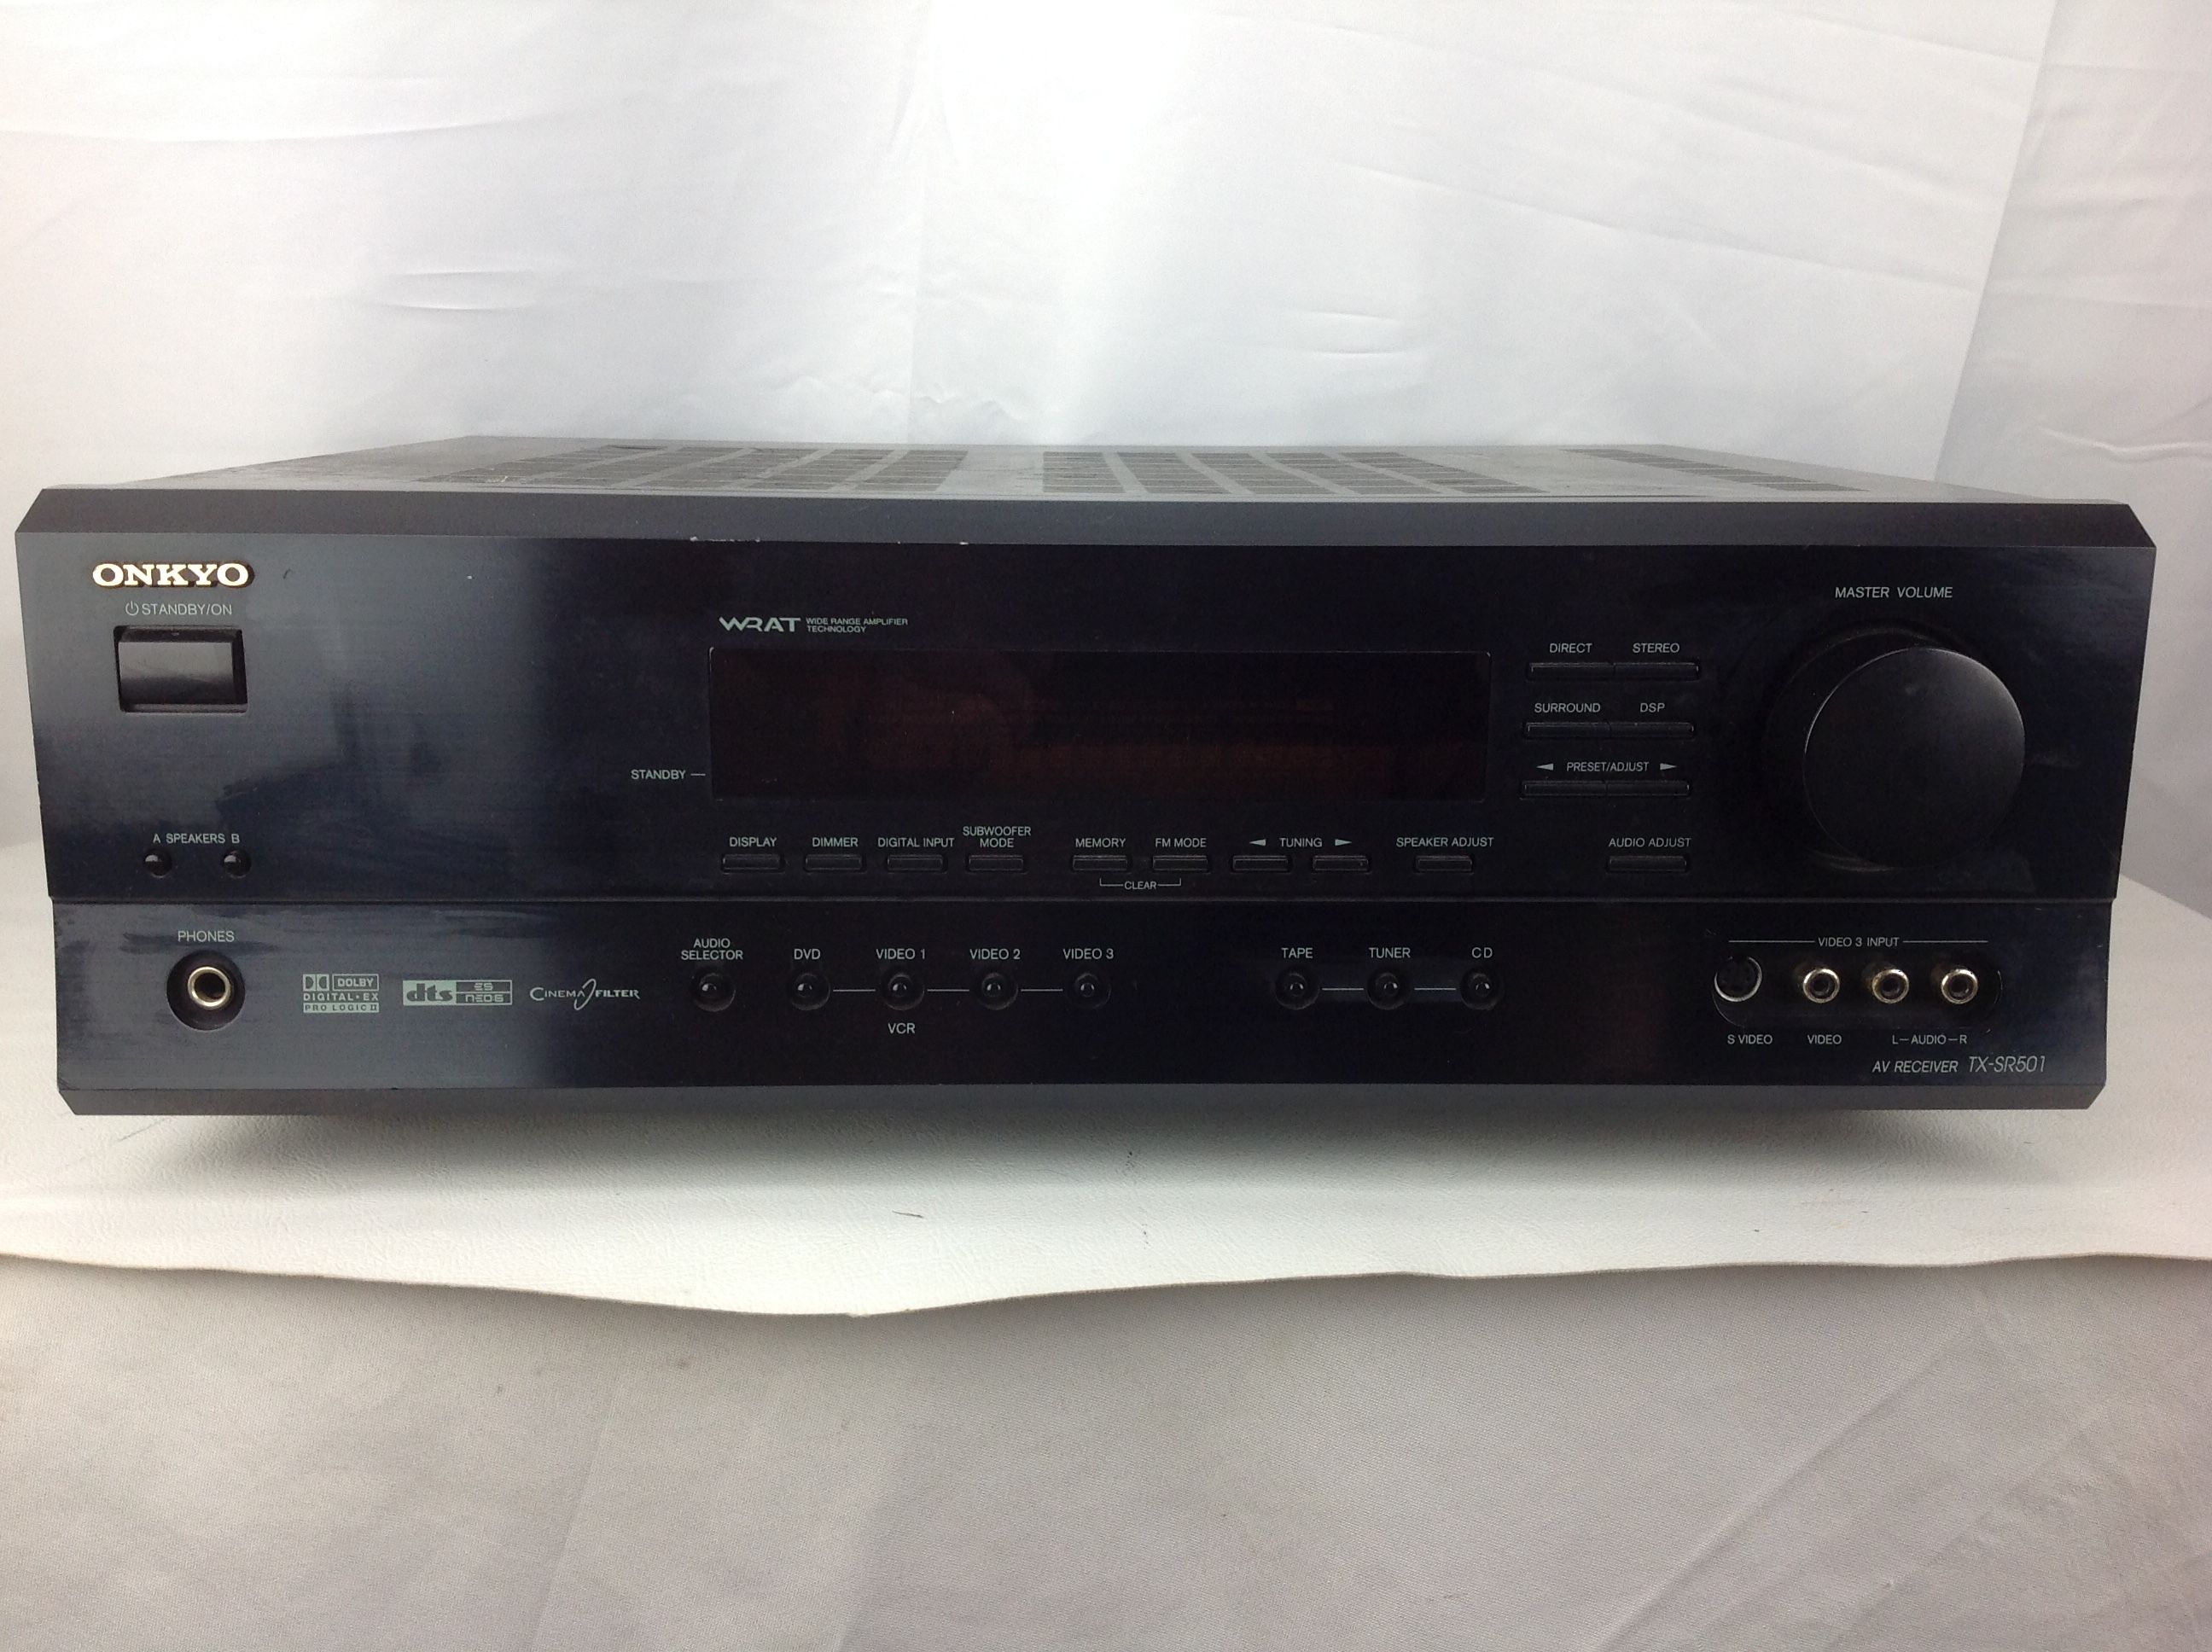 Onkyo 6.1 Channel A/V Stereo Home Theater Receiver WORKS